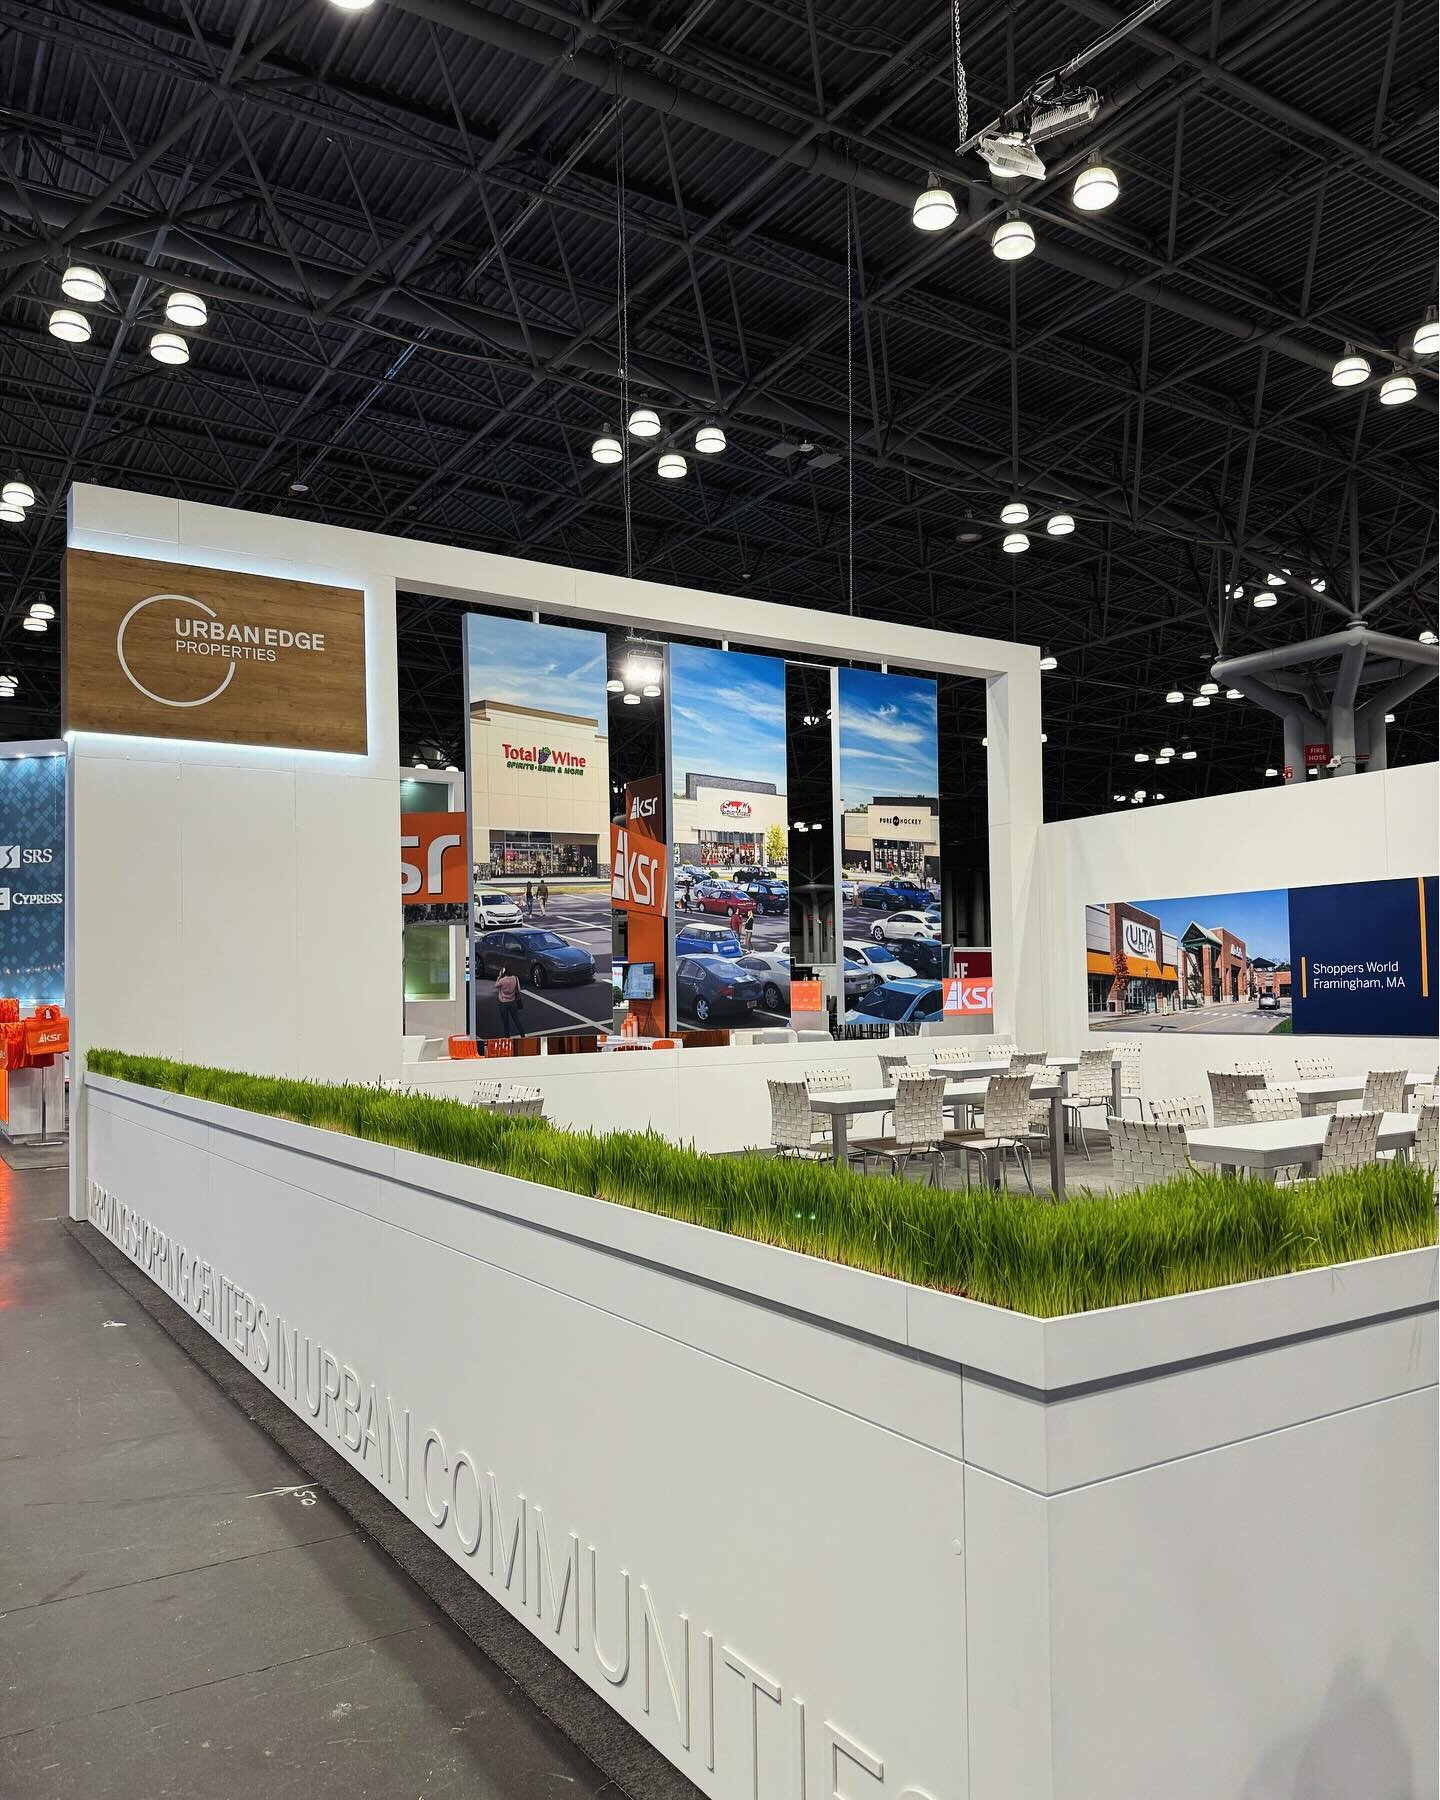 Urban Edge at ICSC looking sharp! 📐

For inquiries reach out at the link in the bio. 

#tradeshow #tradeshows #tradeshowbooth #icsc #marketing #experientialbuilders #experientialagency #experientialmarketing #boothdesign #upscaletradeshow #highendtr